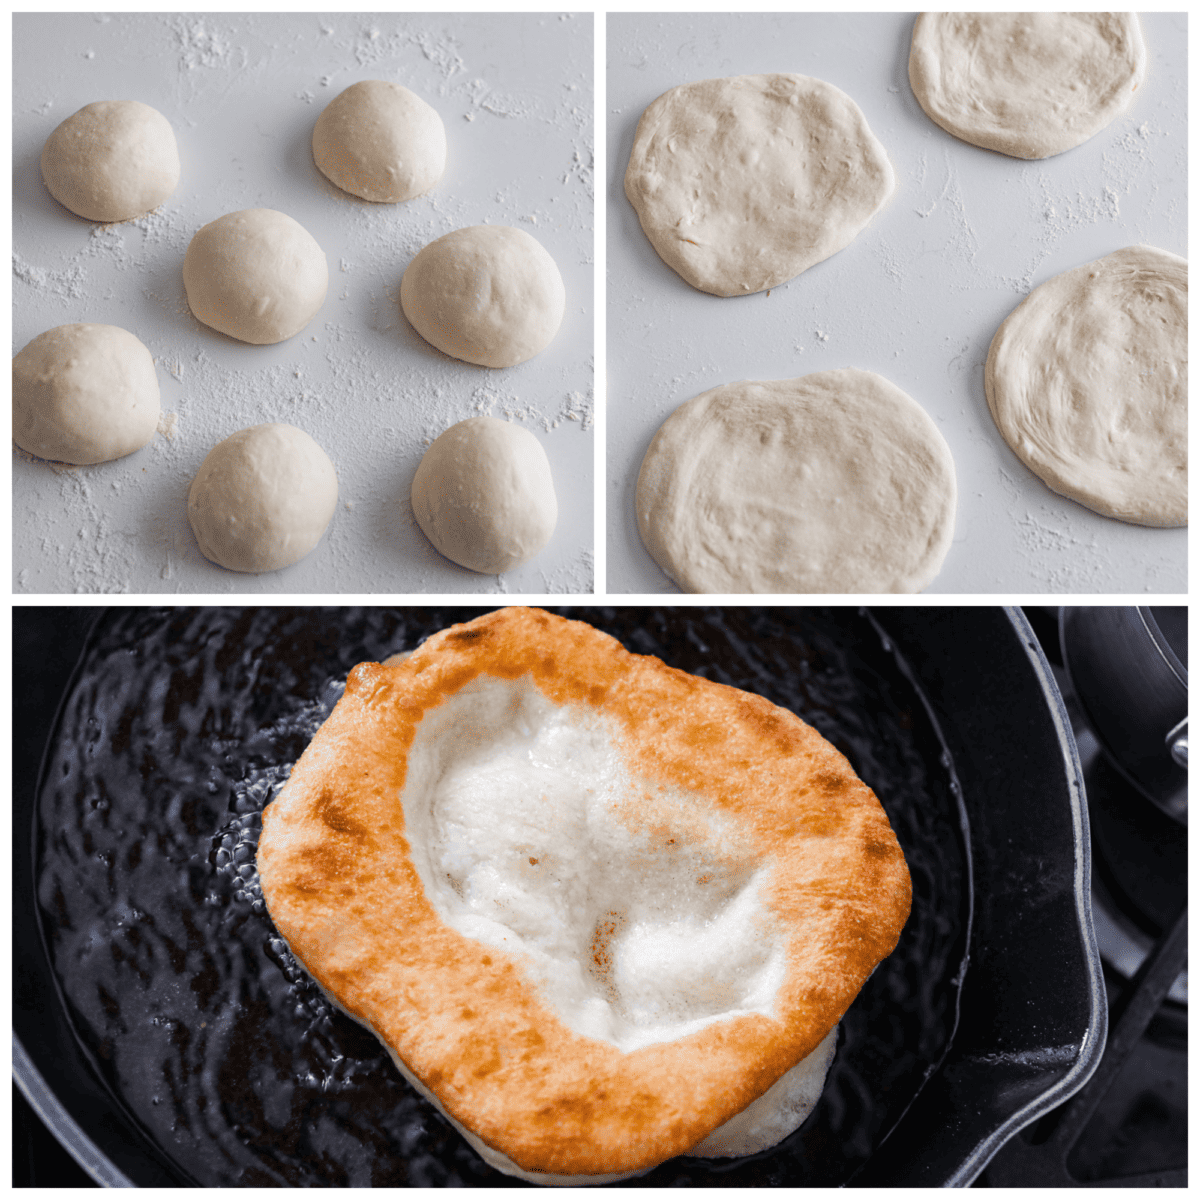 3-photo collage of the dough being shaped and fried.